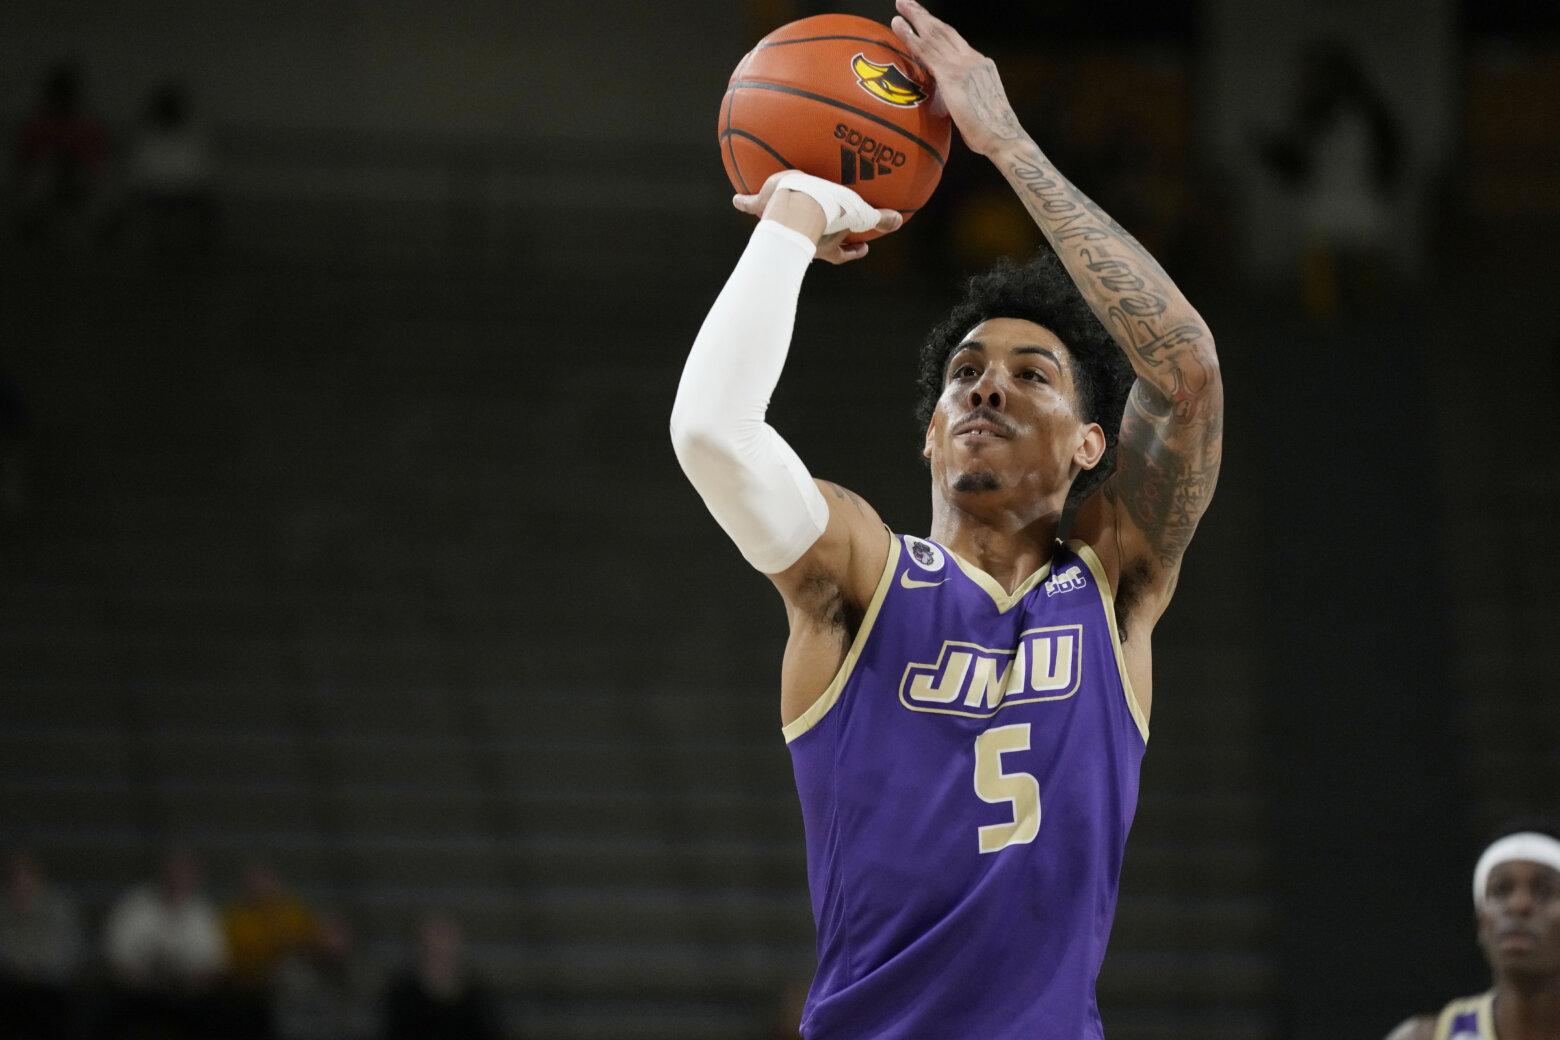 How James Madison methodically built an athletic powerhouse that is having a March Madness moment